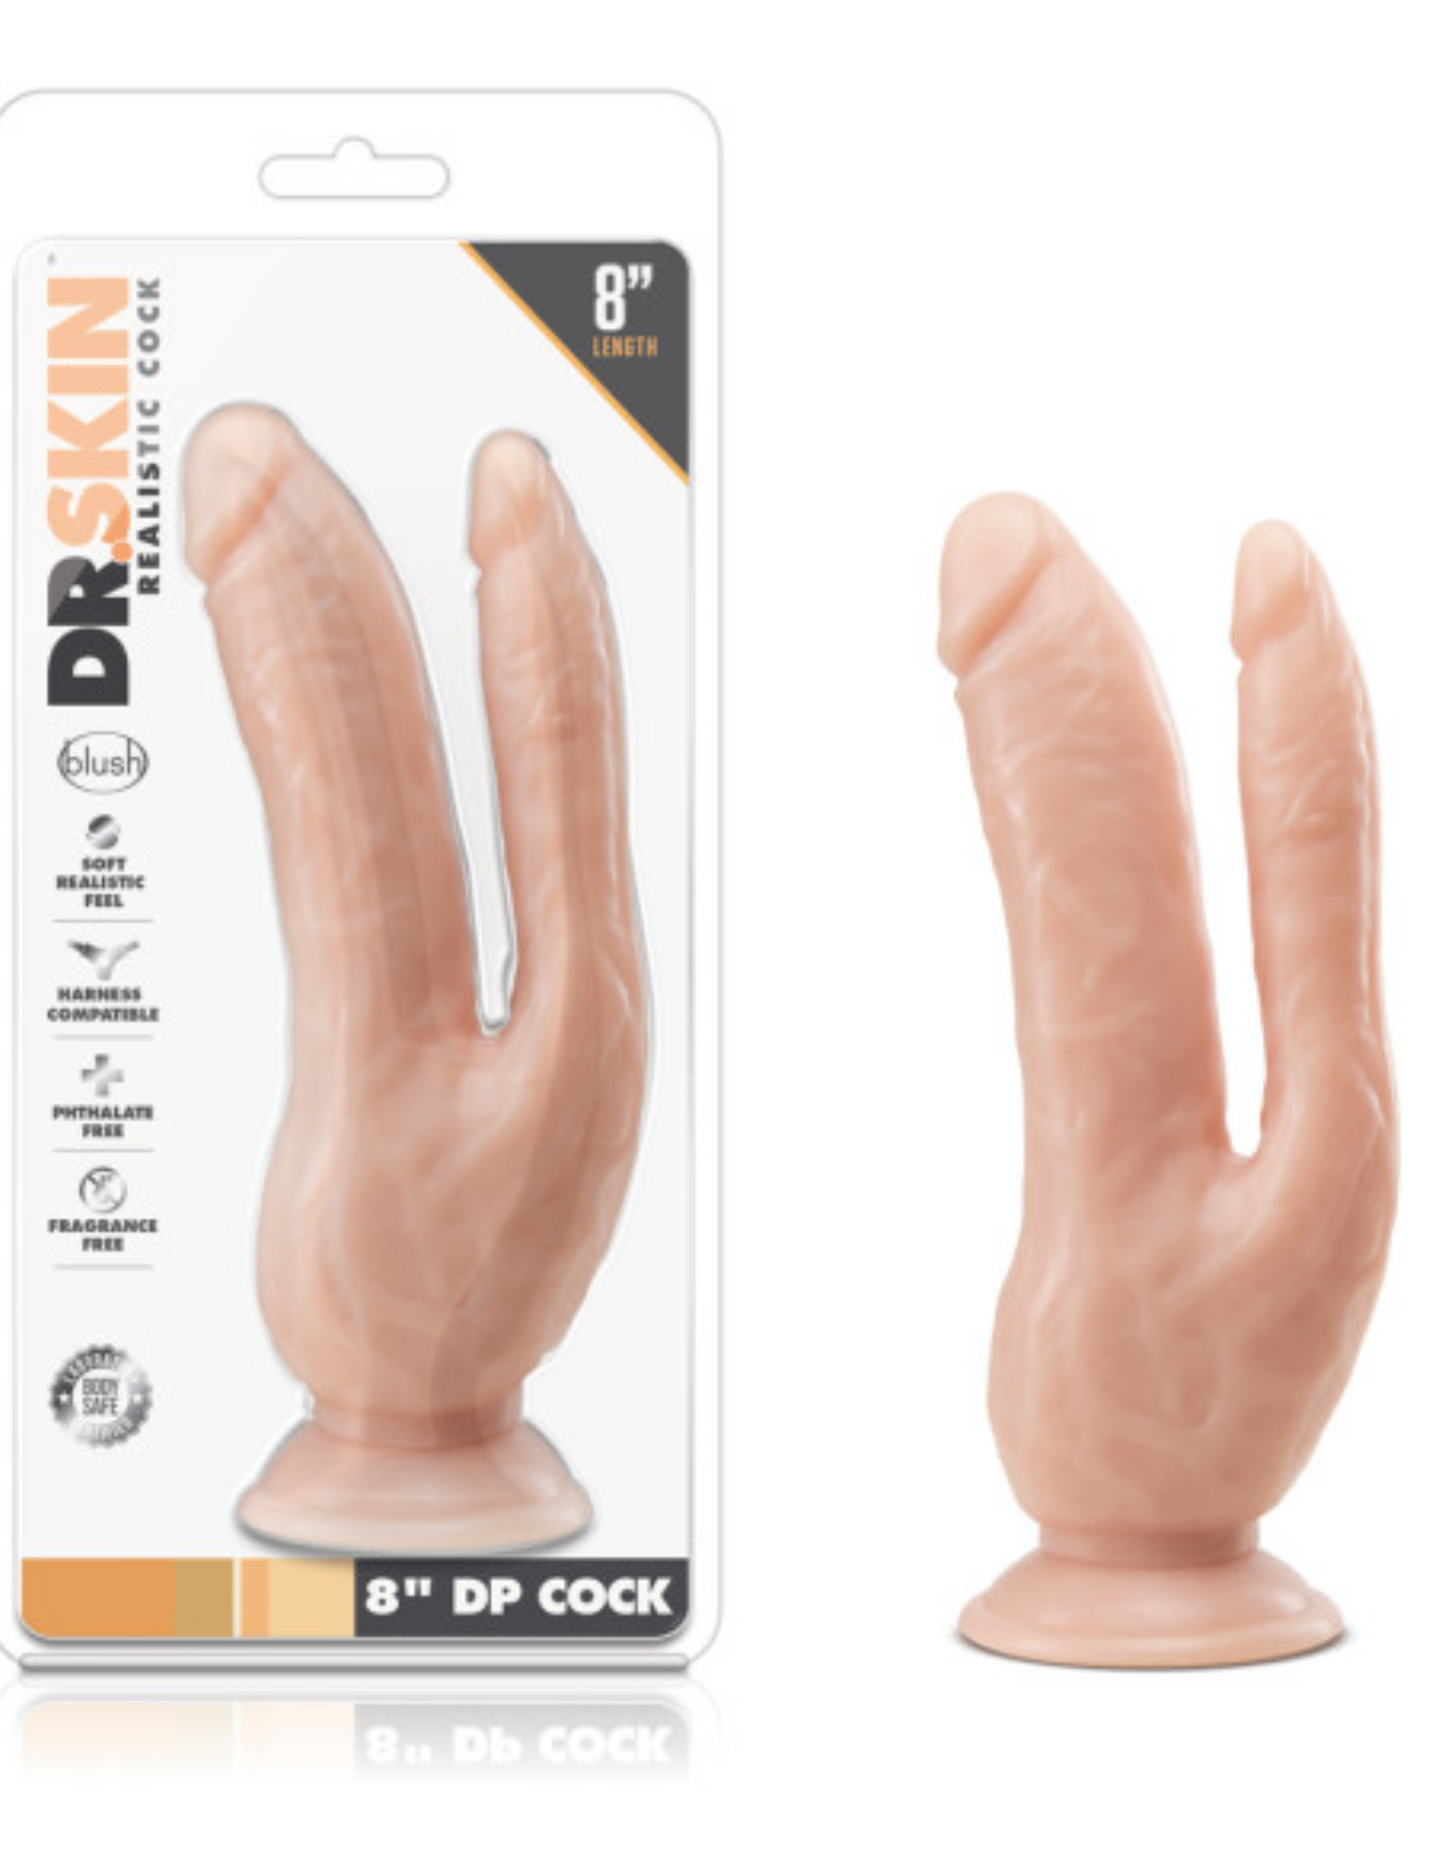 Dr. Skin Dual Penetrating Dildo w/ Suction Cup 8in (vanilla) next to package.